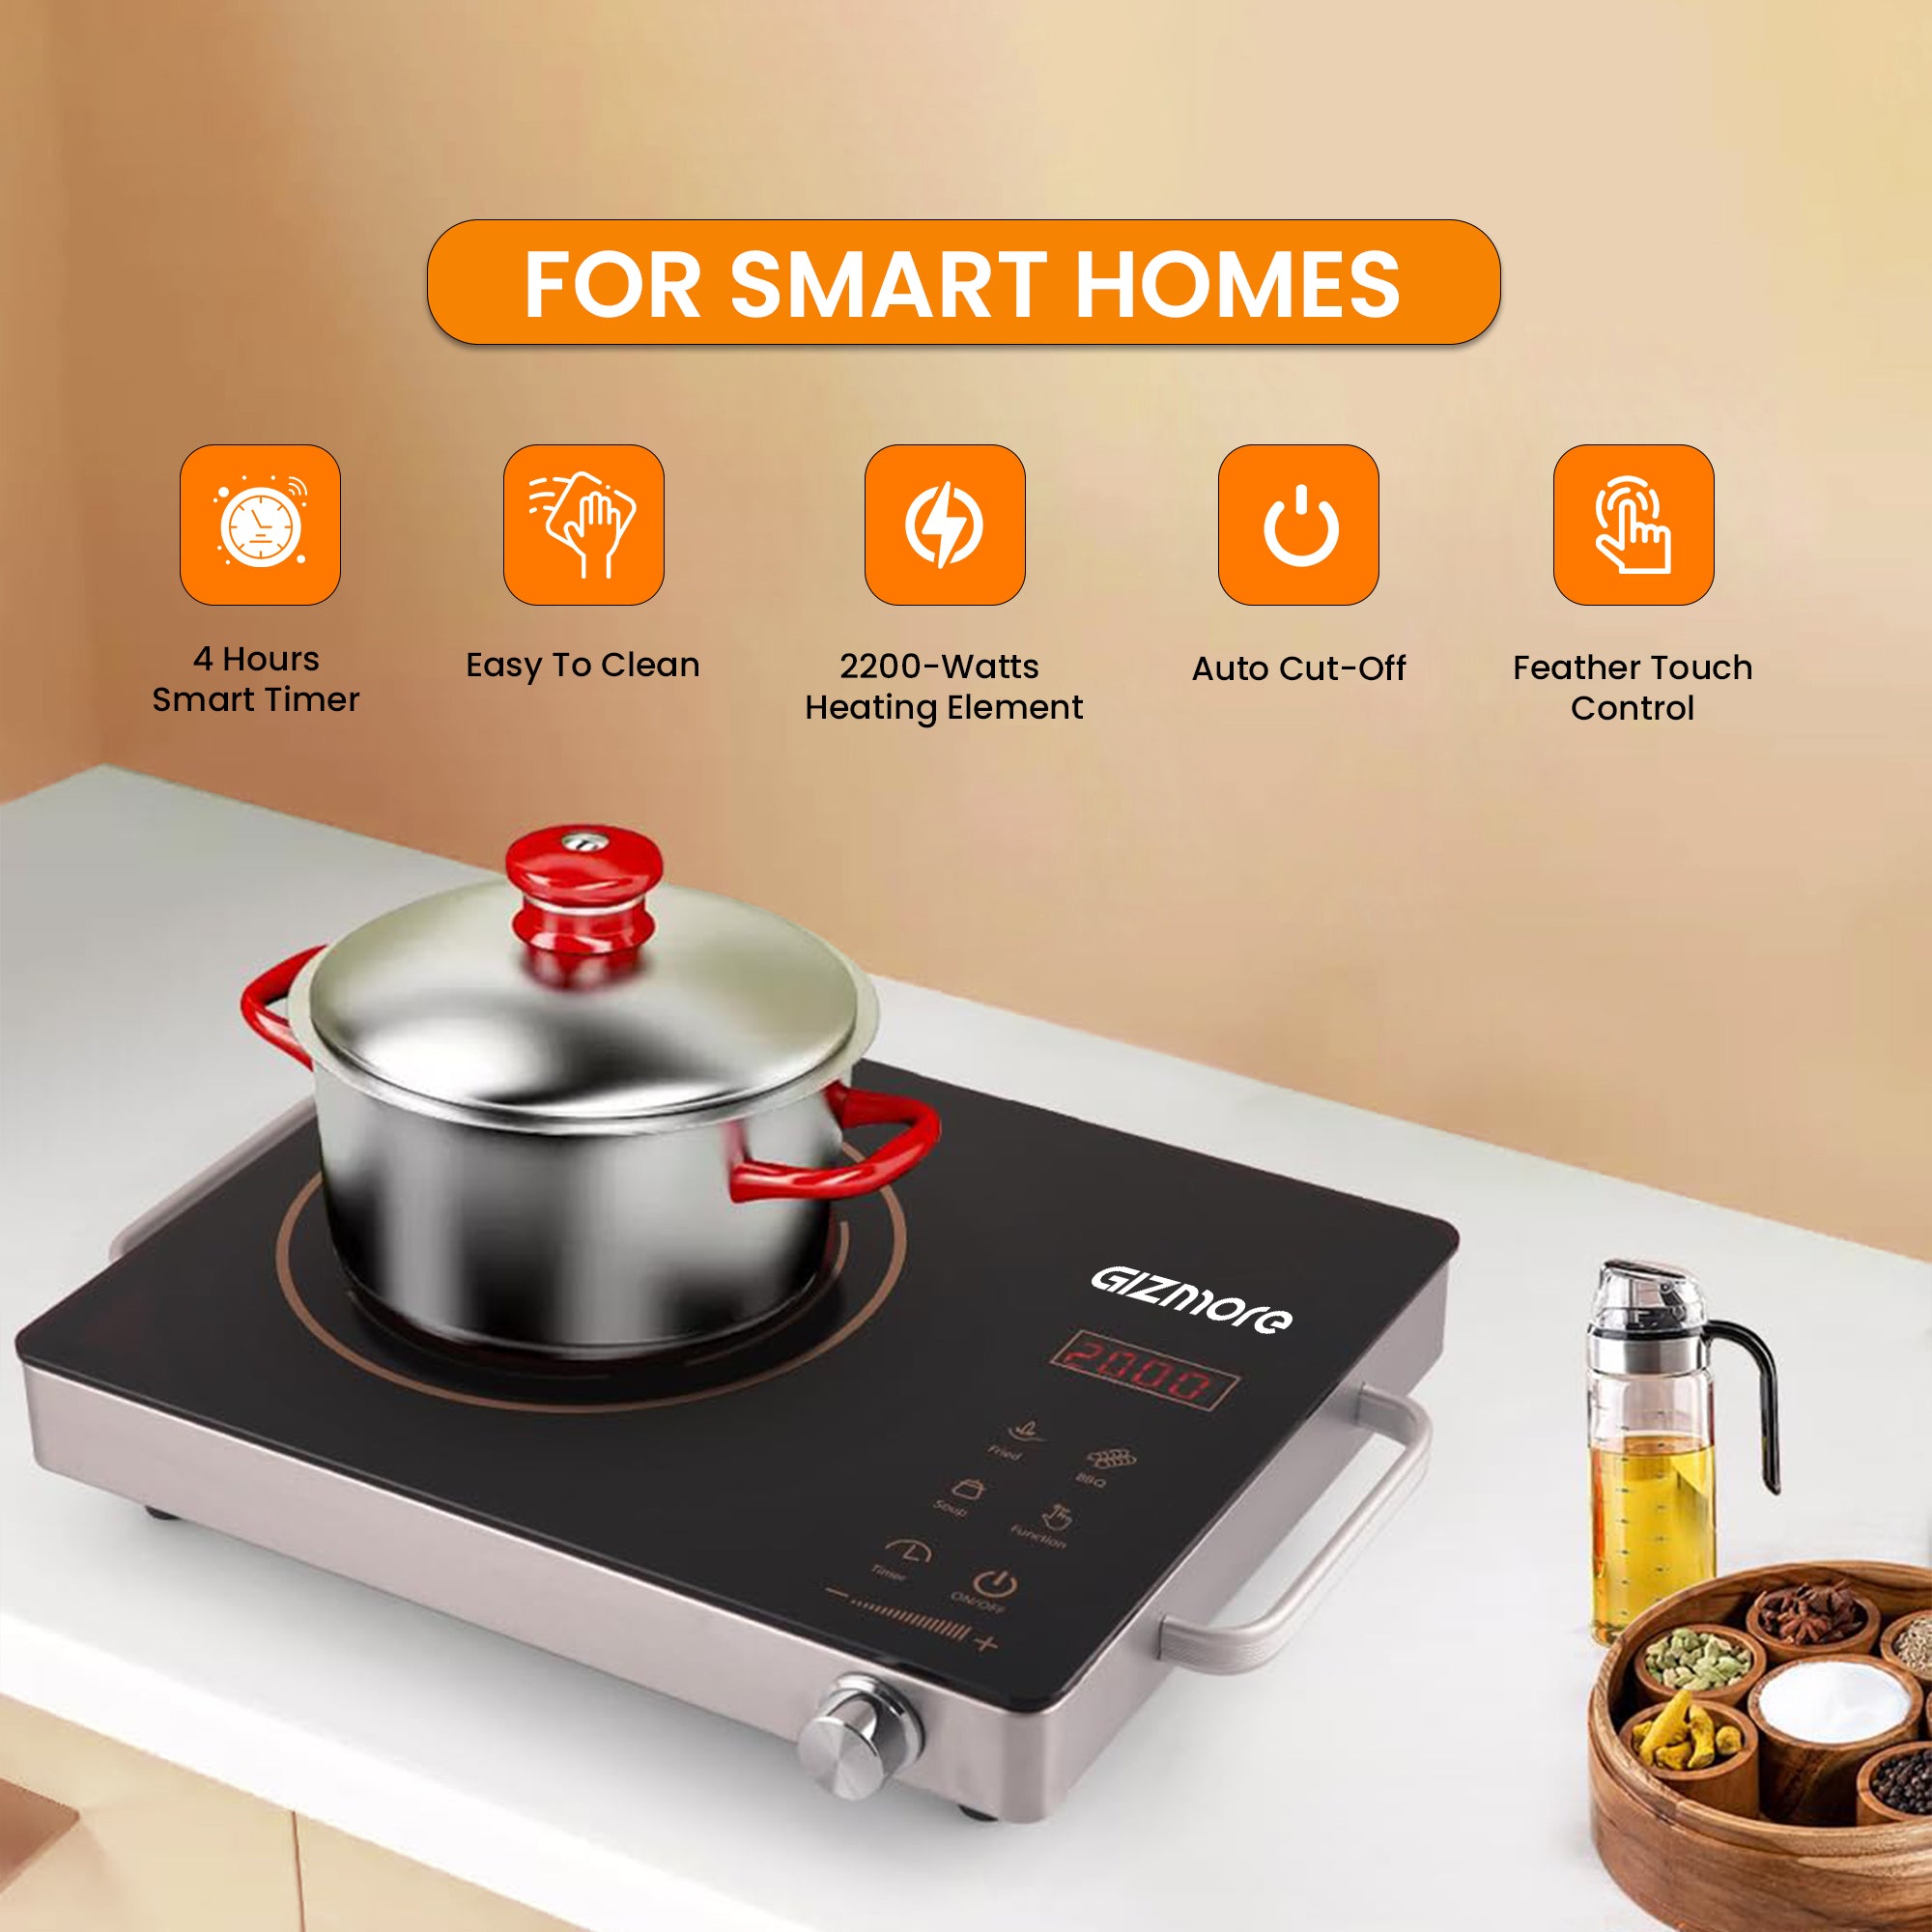 GIZMORE 2200 W Infrared Induction Cooktop Compatible with All Utensils| Crystal Glass & Touch Control| Auto Cooling System |Digital Display |Temperature Adjustability